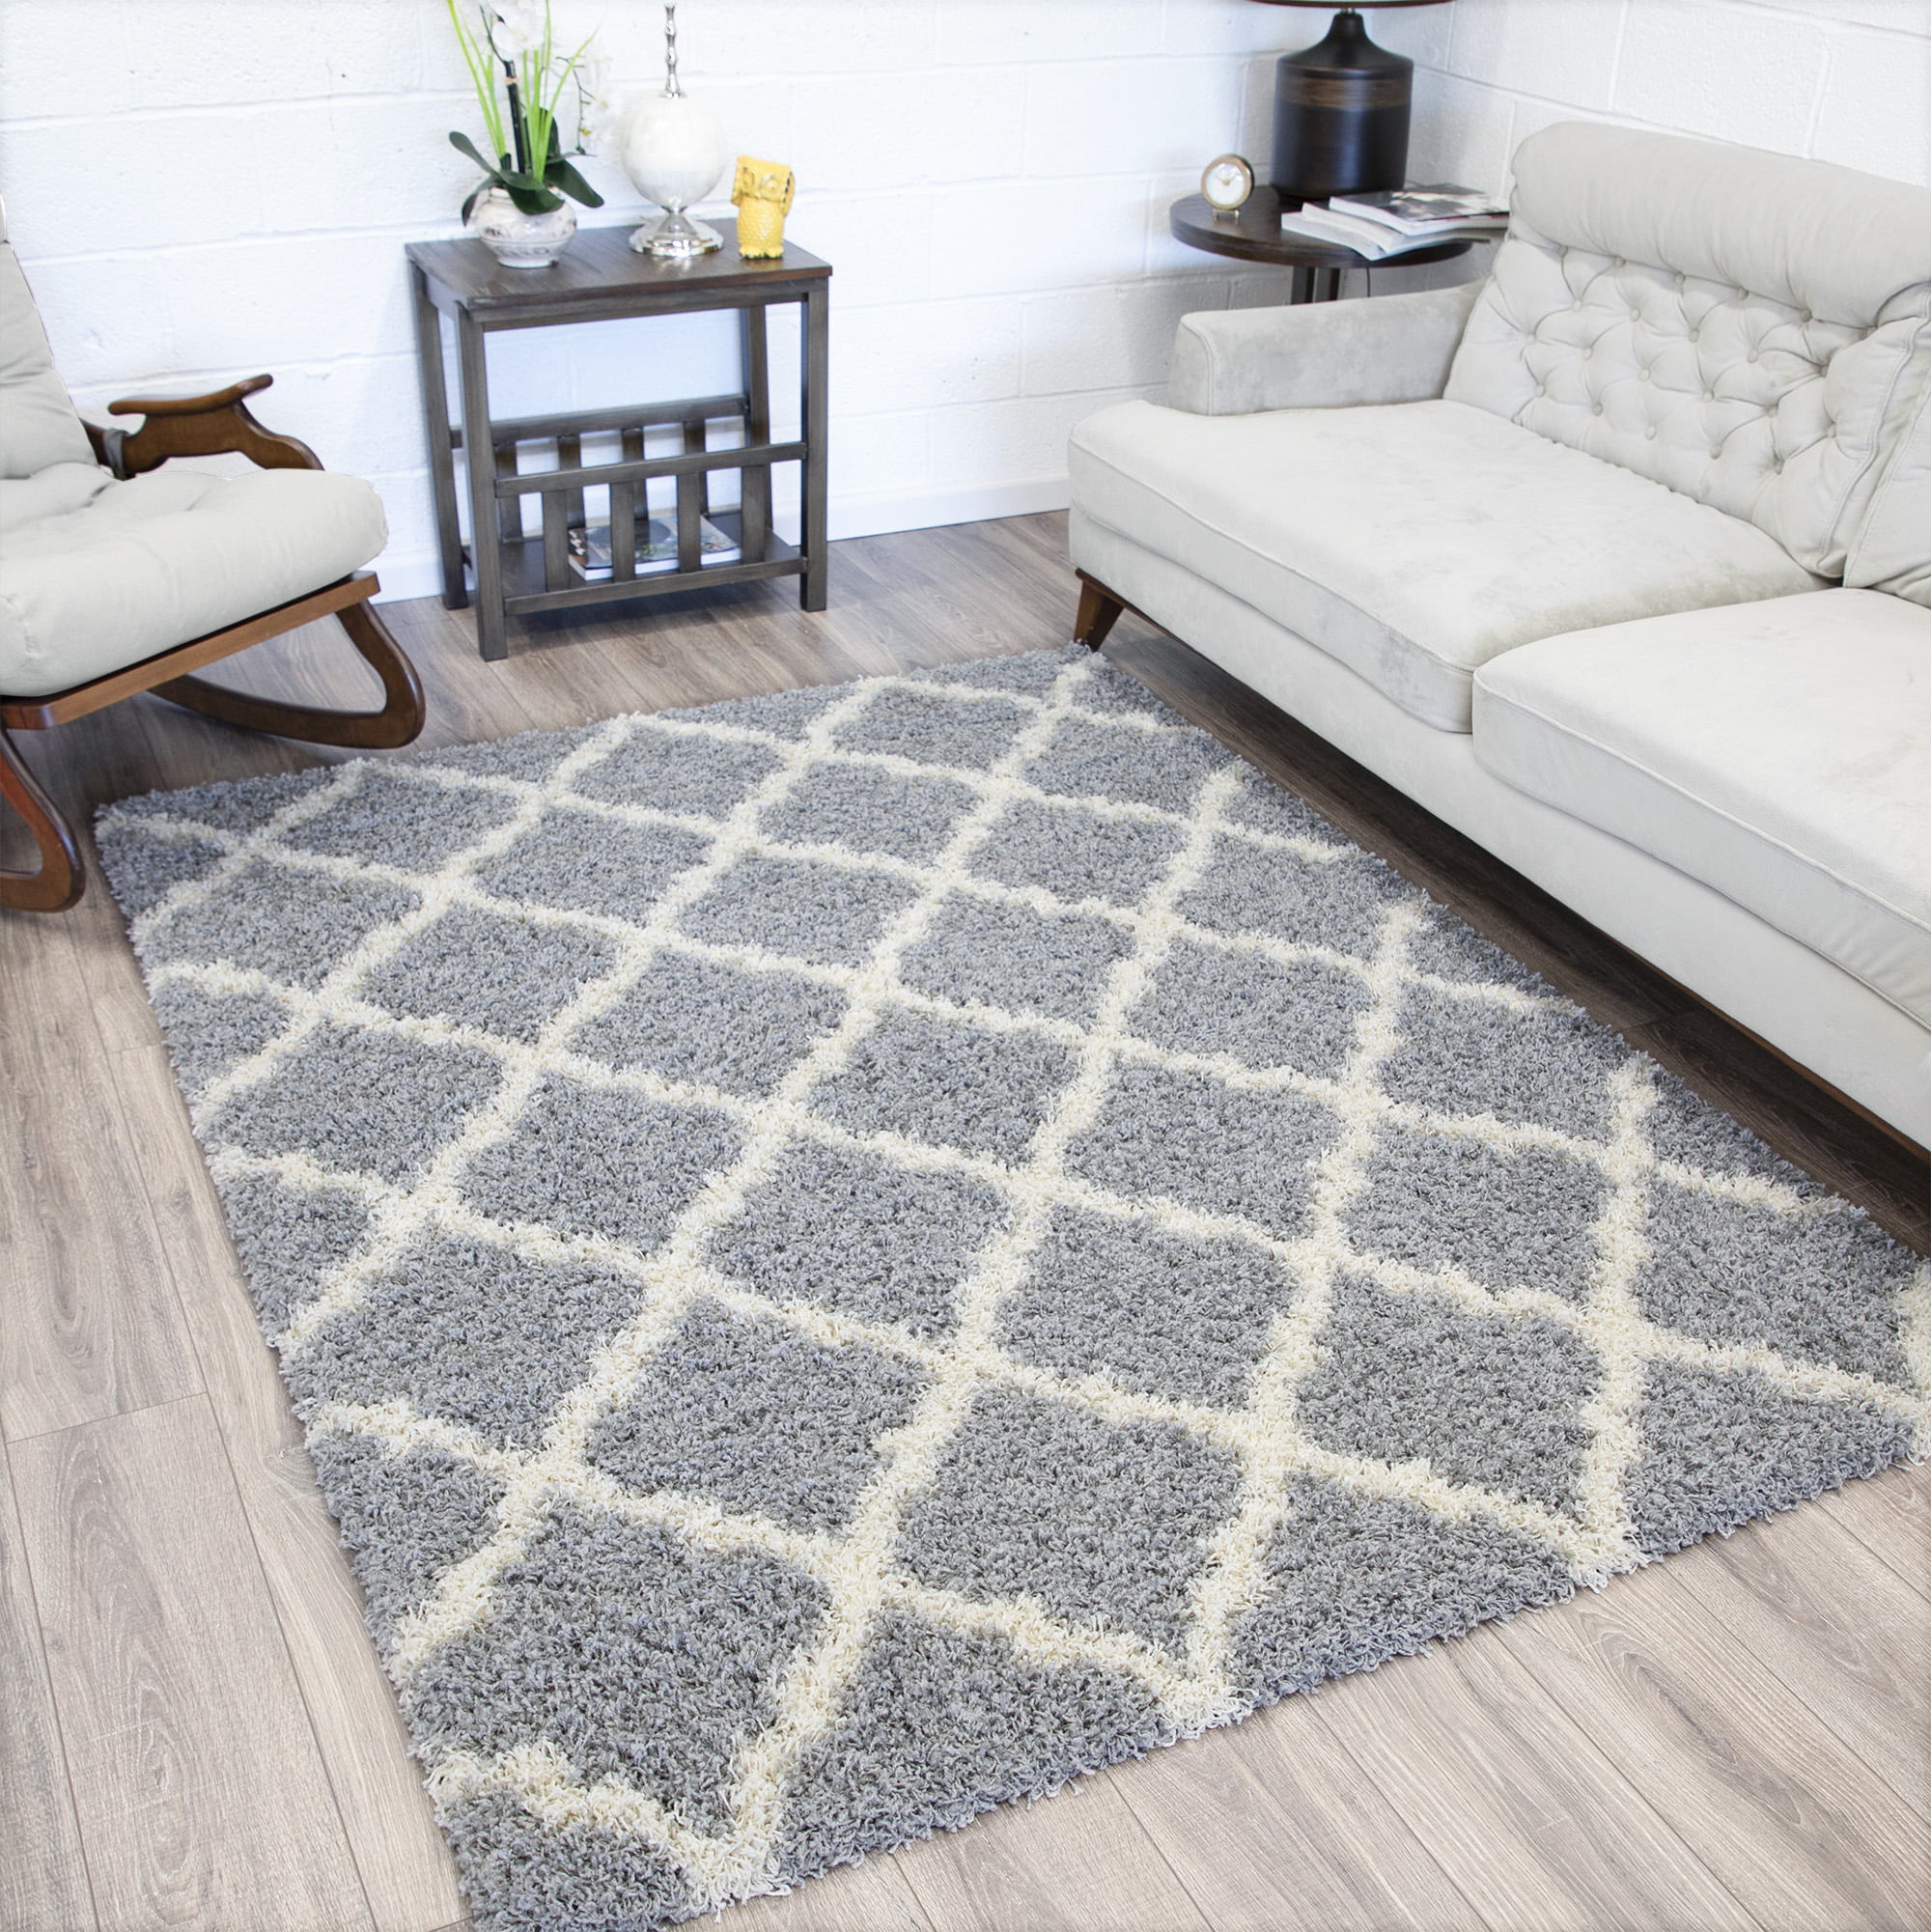 Cream Shaggy Rug Moroccan Trellis Living Room Rugs Thick Non Shed Bedroom Mats